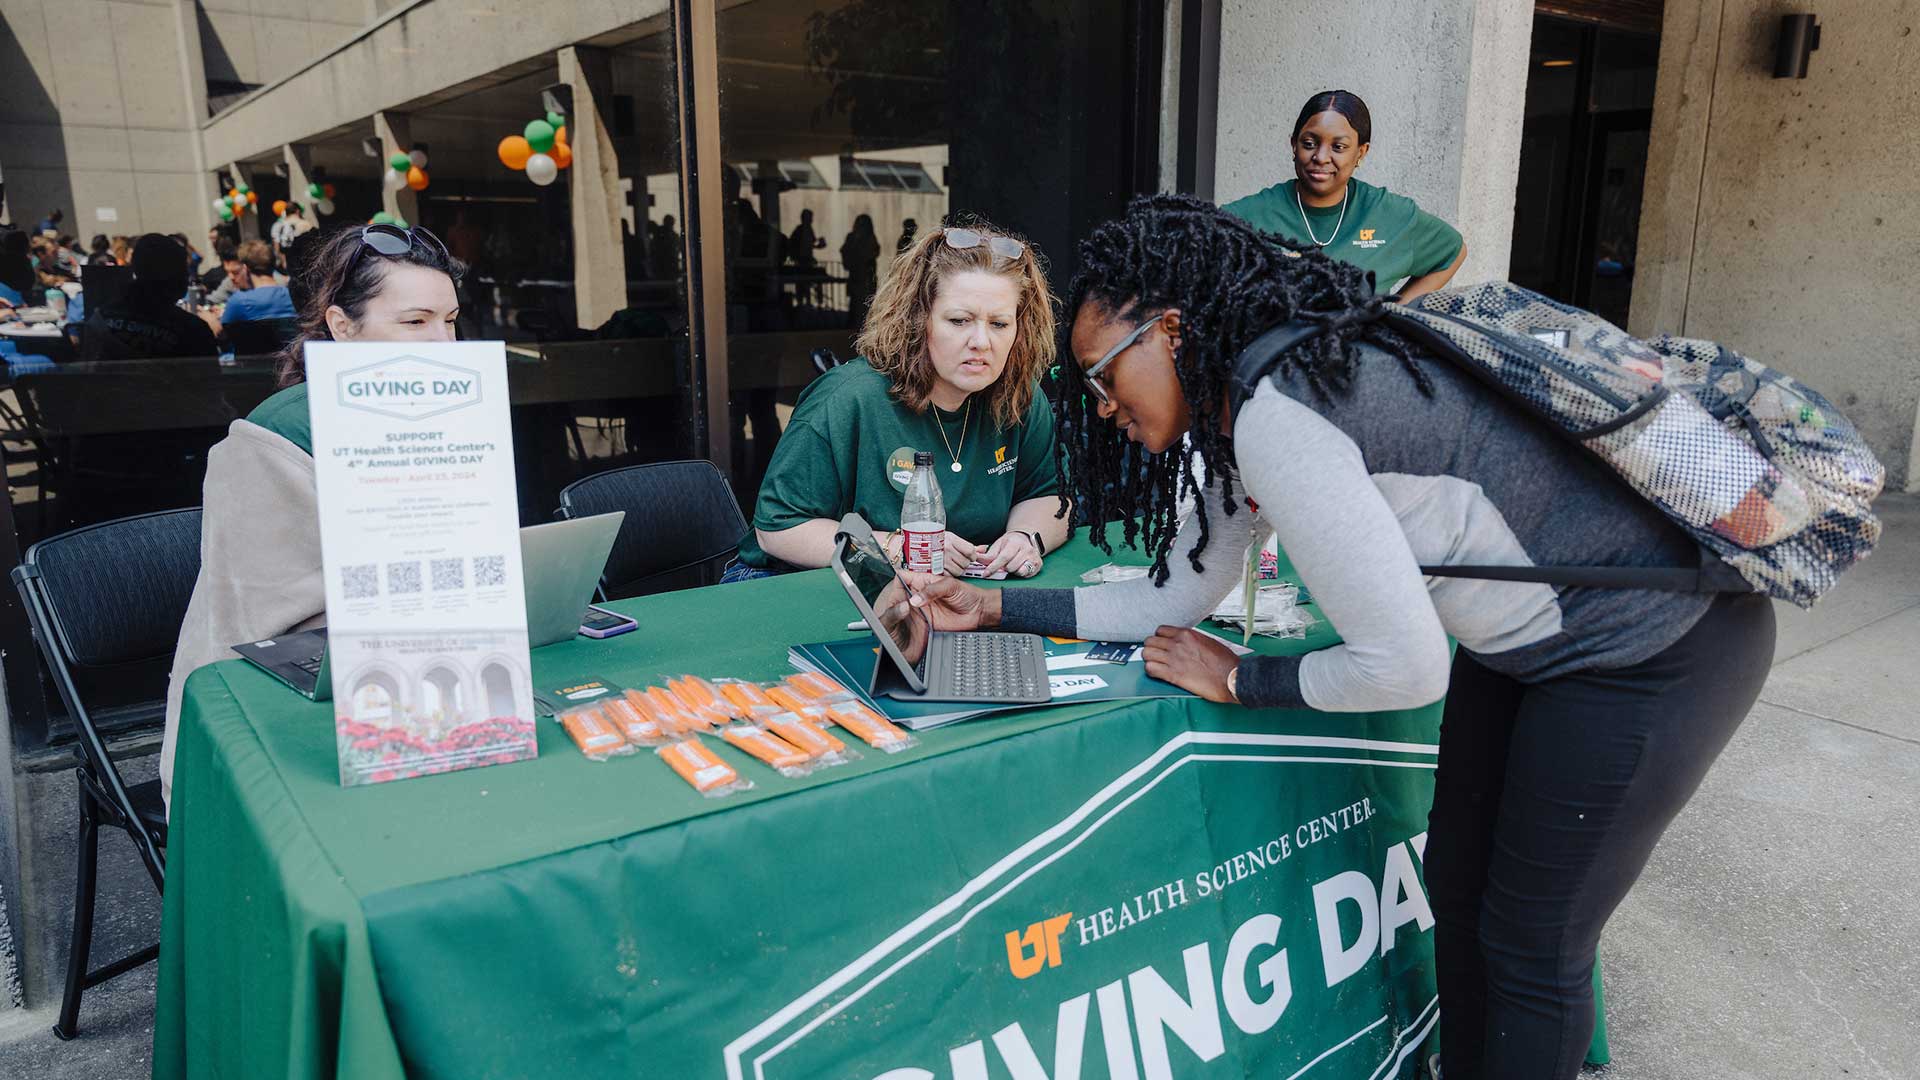 A student using an iPad to make a donation at a UTHSC Giving Day table run by three female workers.